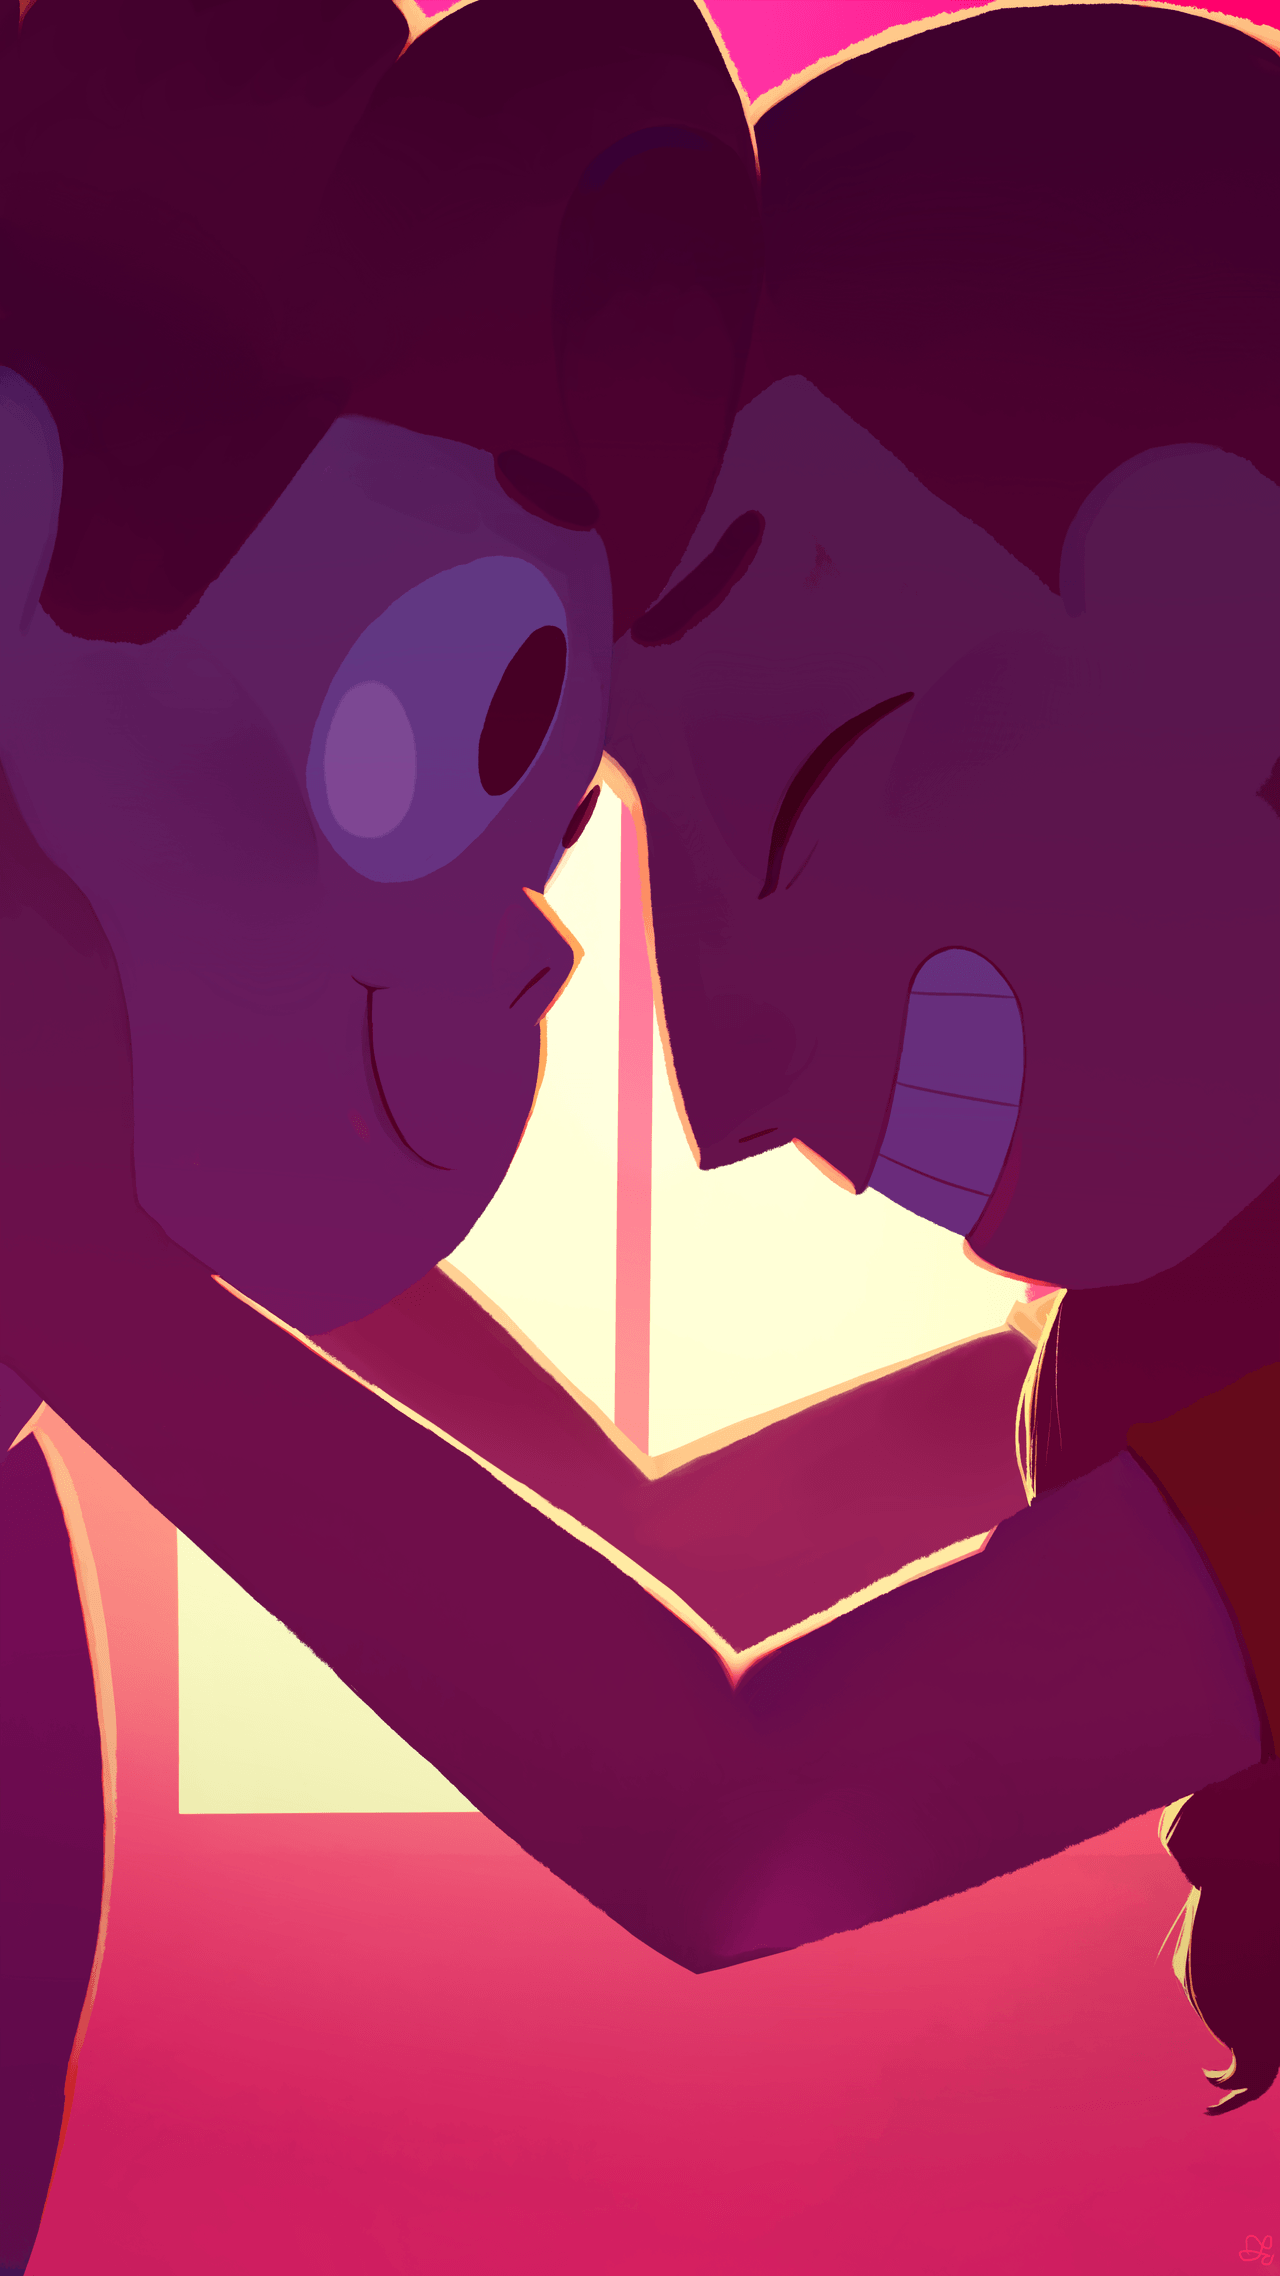 Steven And Connie By Chung Sae. Steven Universe Wallpaper